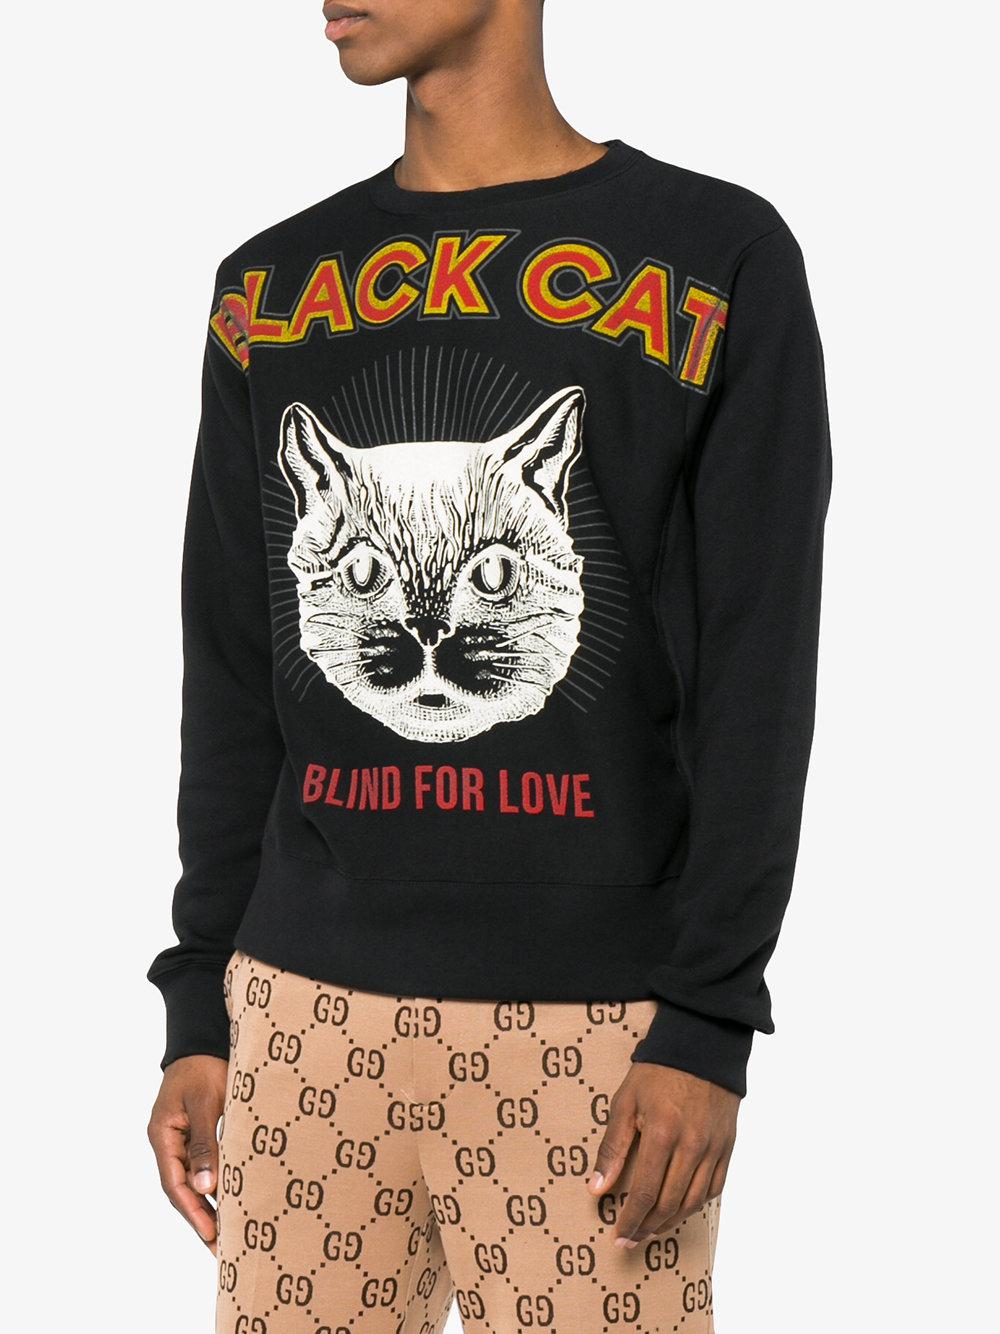 black cat blind for love gucci